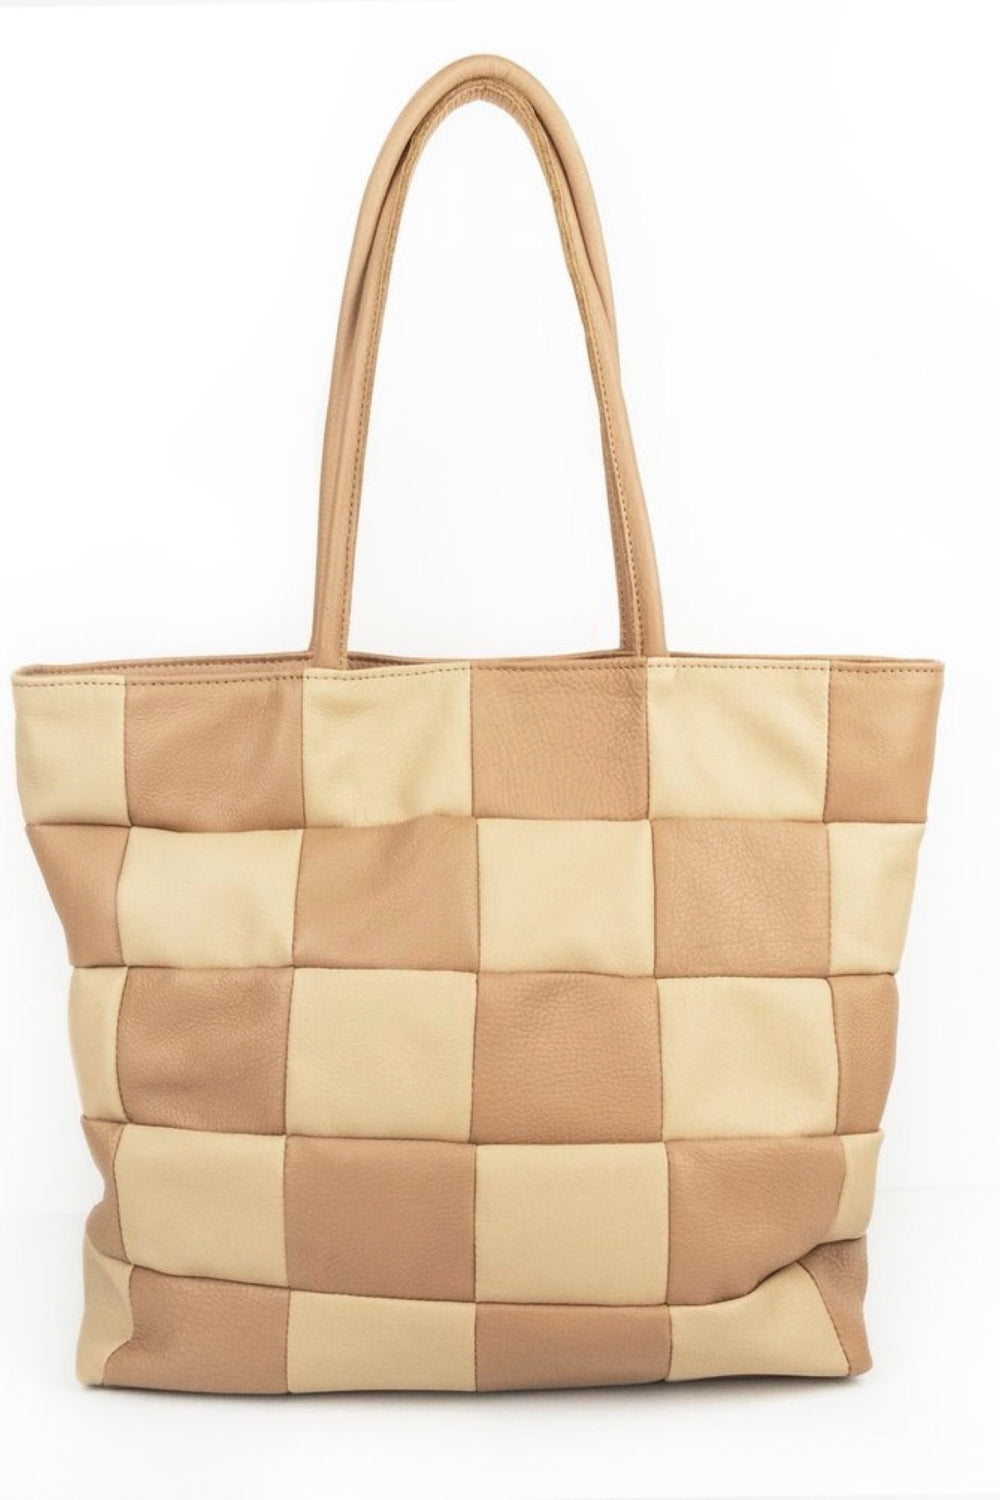 Tan Checkered Patchwork Tote